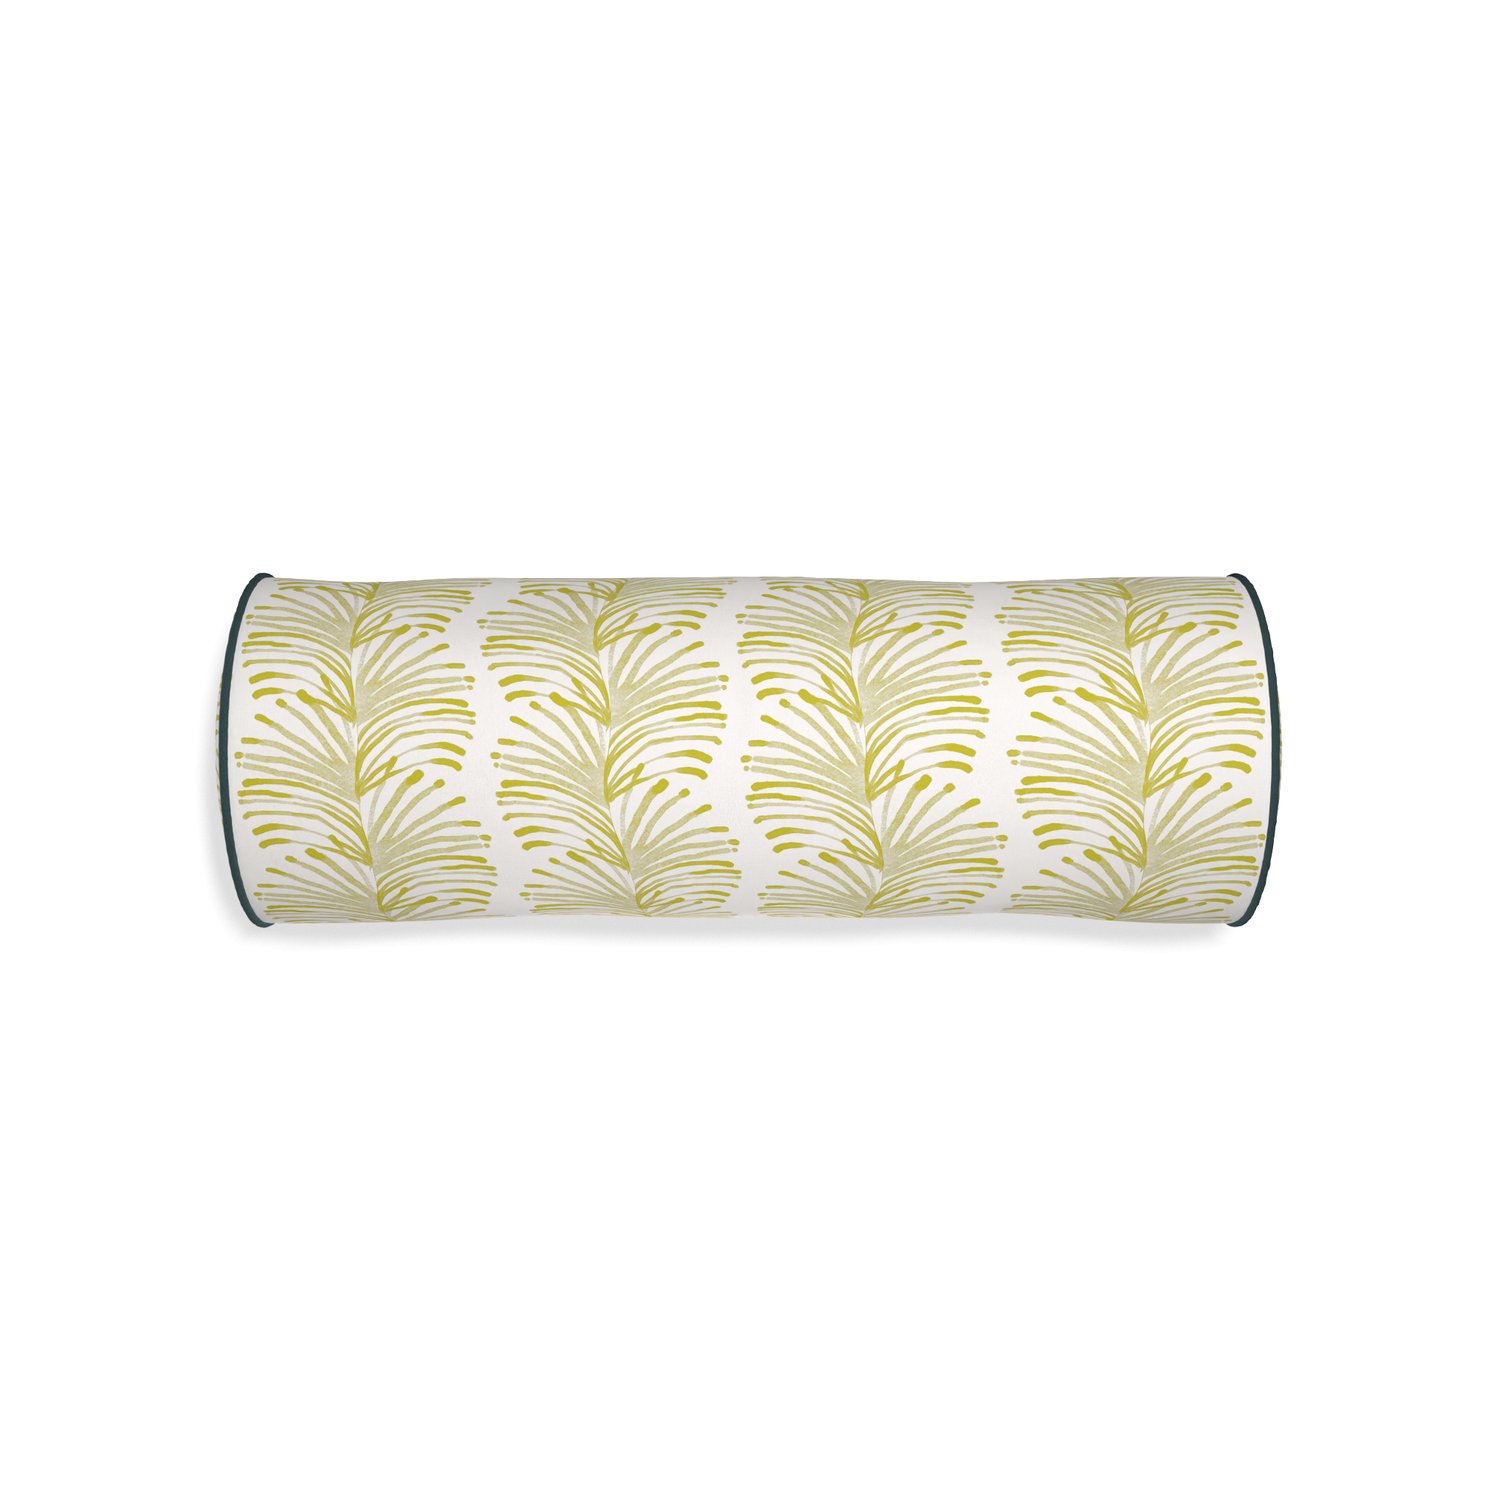 Bolster emma chartreuse custom yellow stripe chartreusepillow with p piping on white background